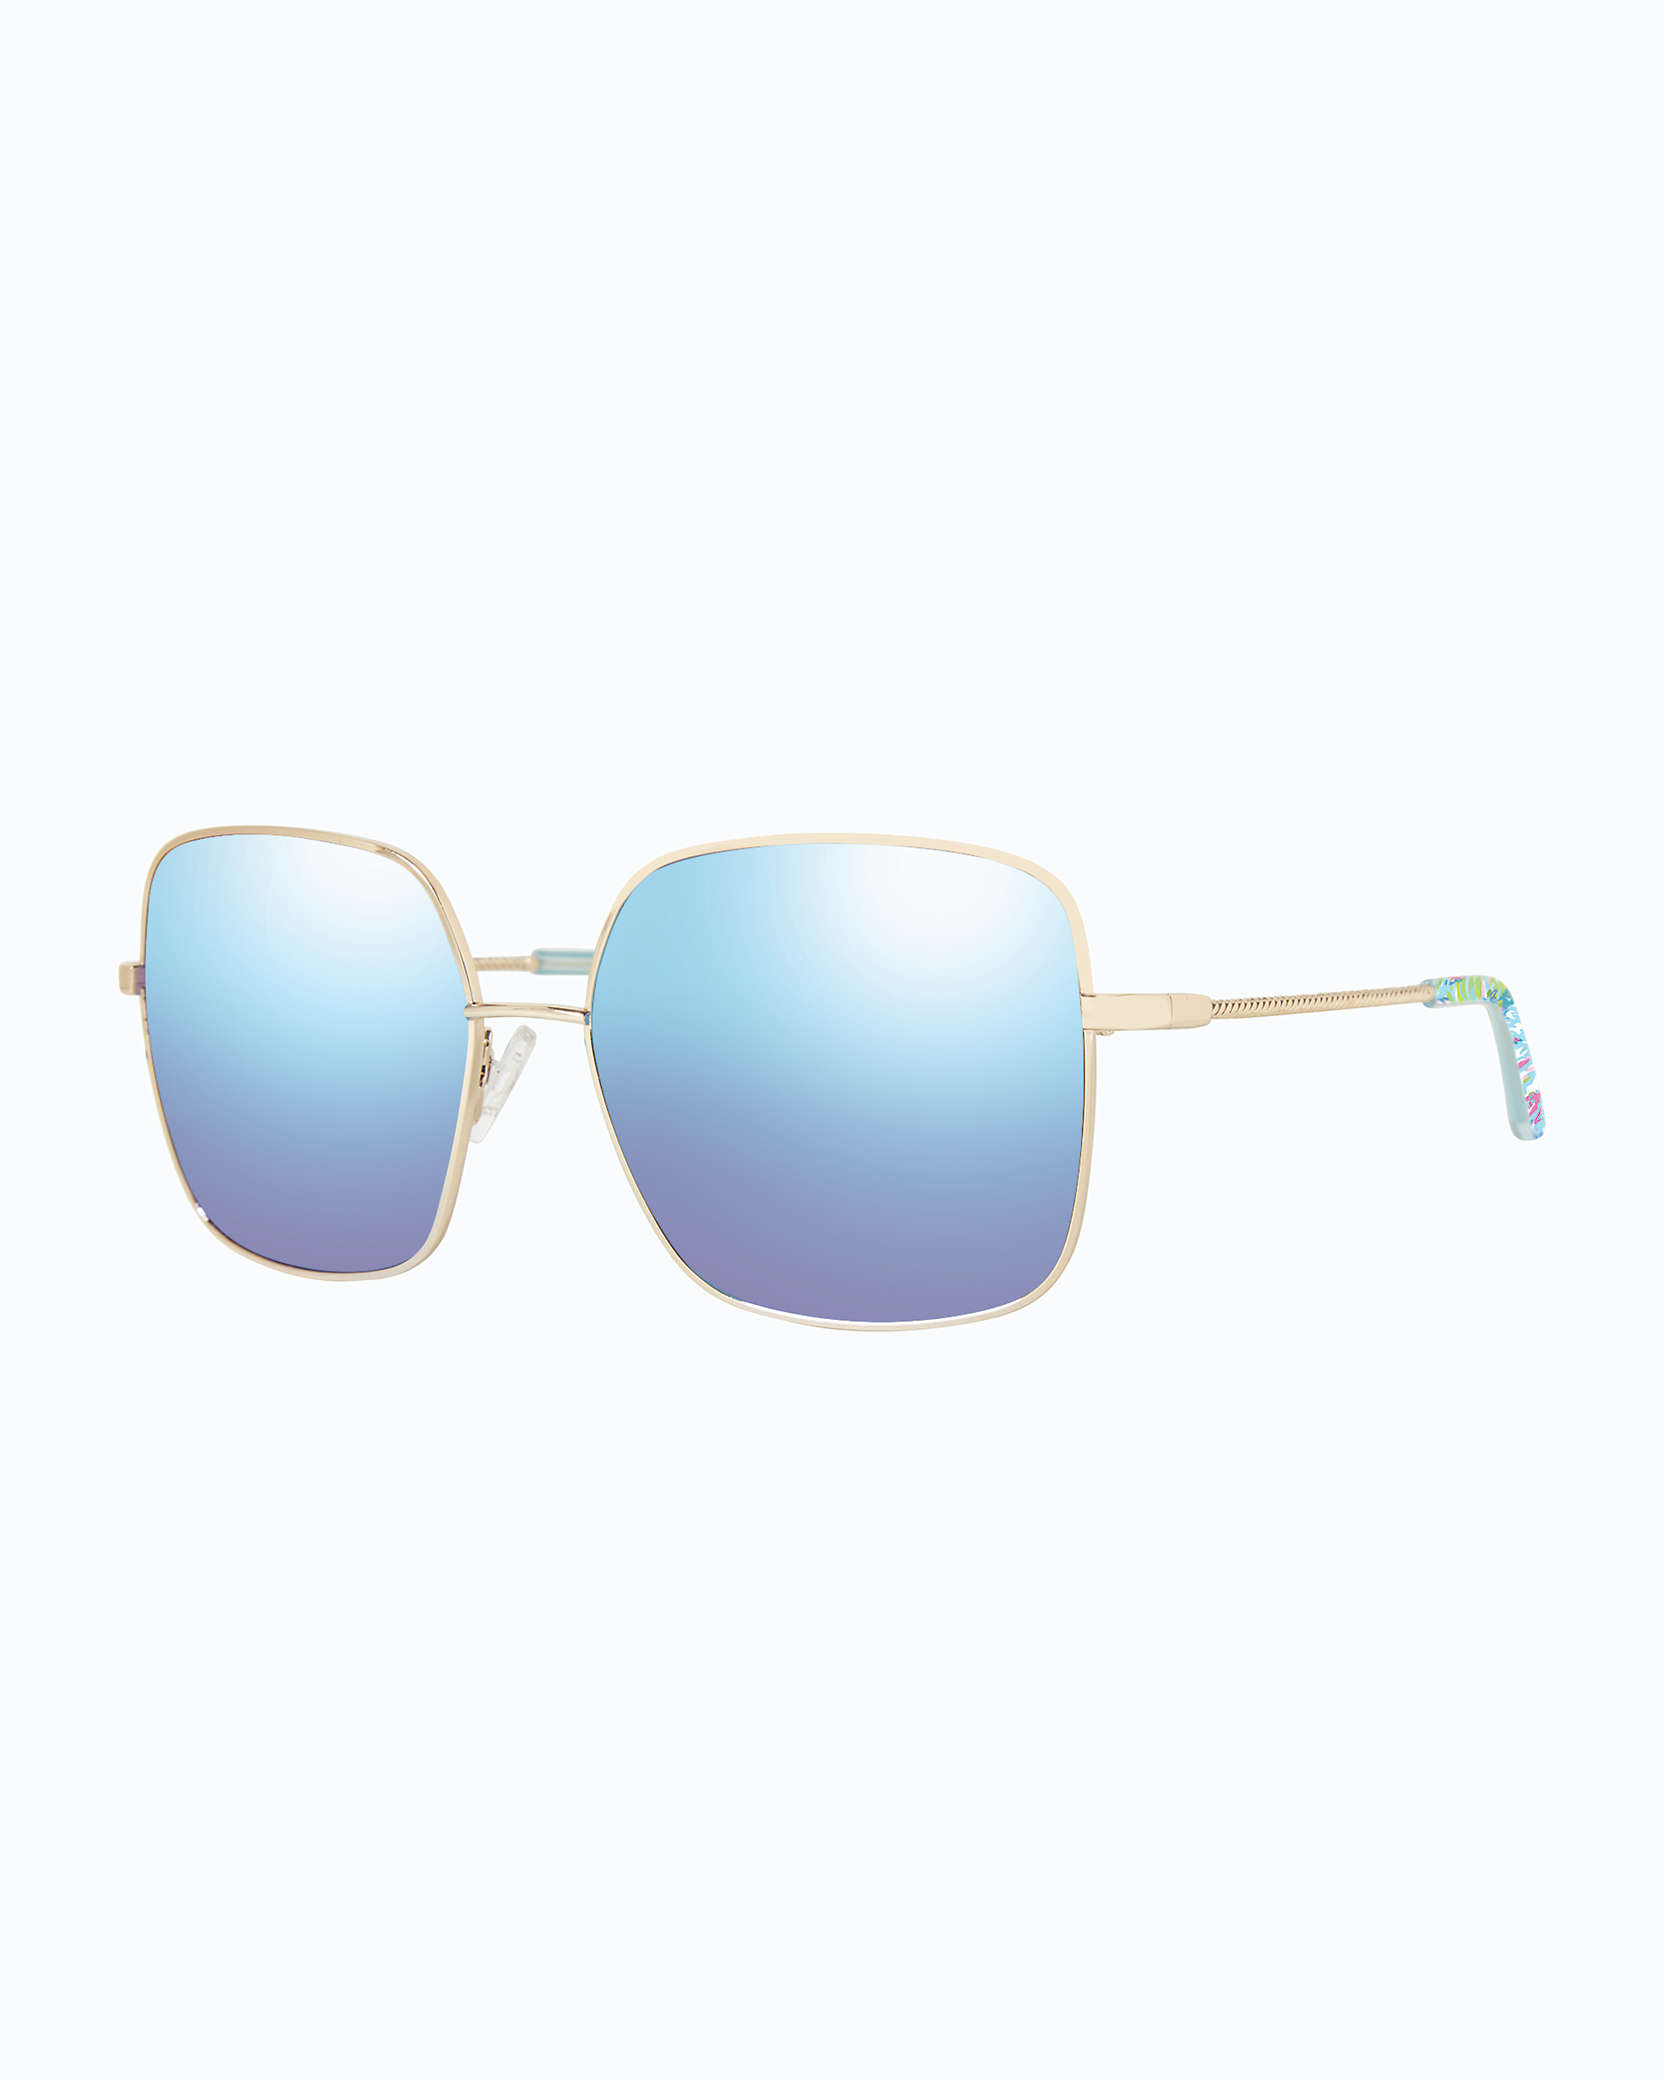 Lilly Pulitzer Aubree Sunglasses In Gold Metallic Fished My Wish